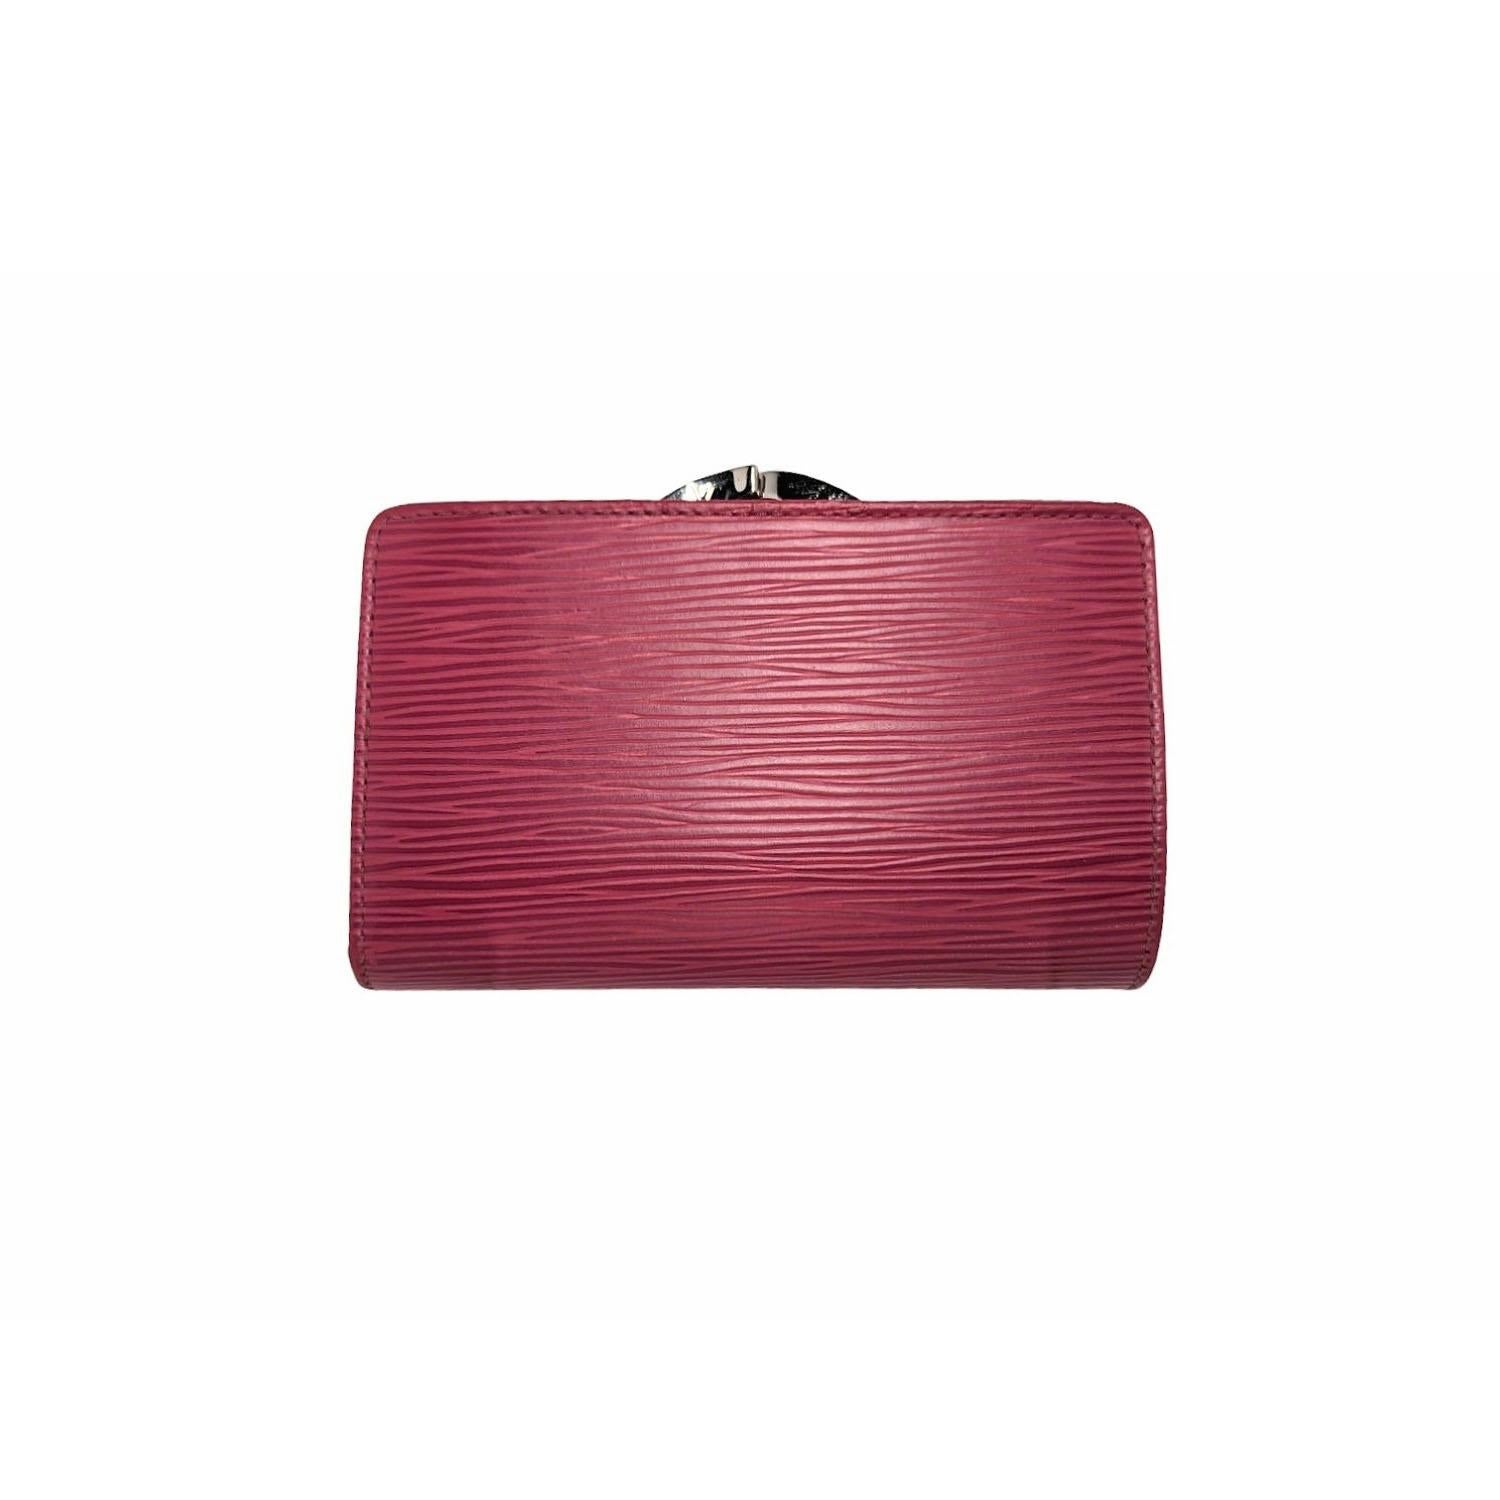 Louis Vuitton Epi French Purse Wallet in Castillan Red. This stylish clutch wallet is finely crafted of Louis Vuitton signature textured epi leather in bright red. The wallet opens to a cross-grain red leather interior with card slots, patch